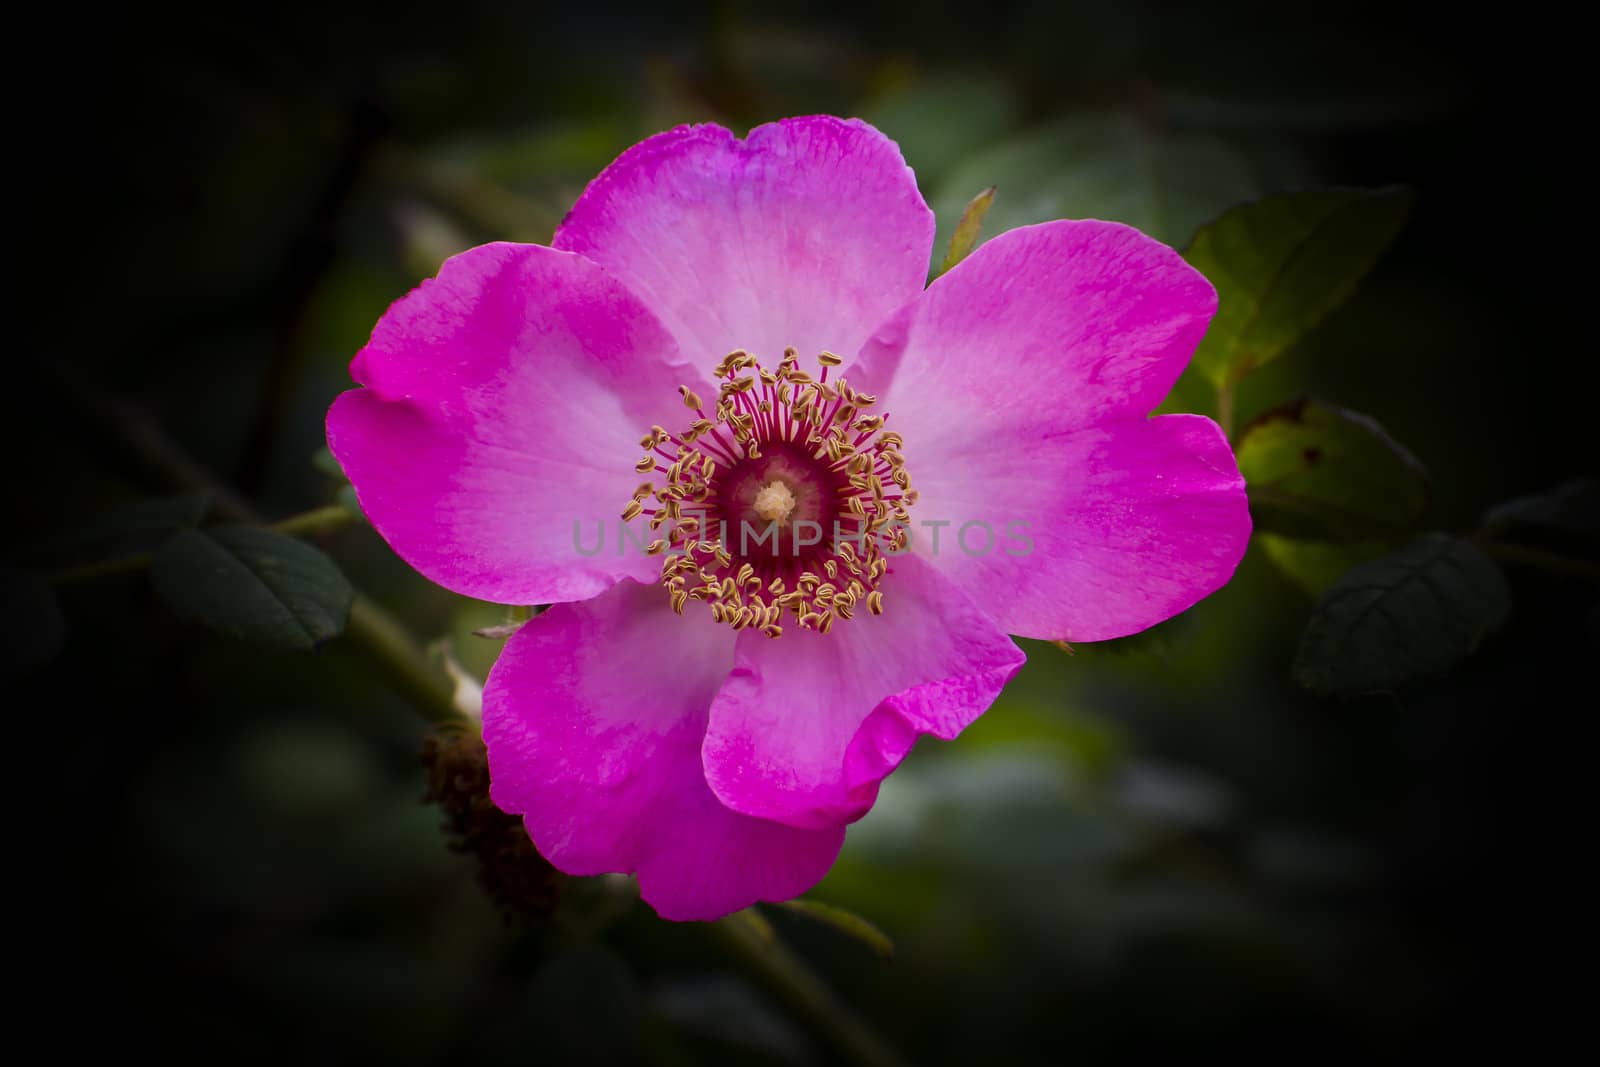 Delicate red petals of a wild rose